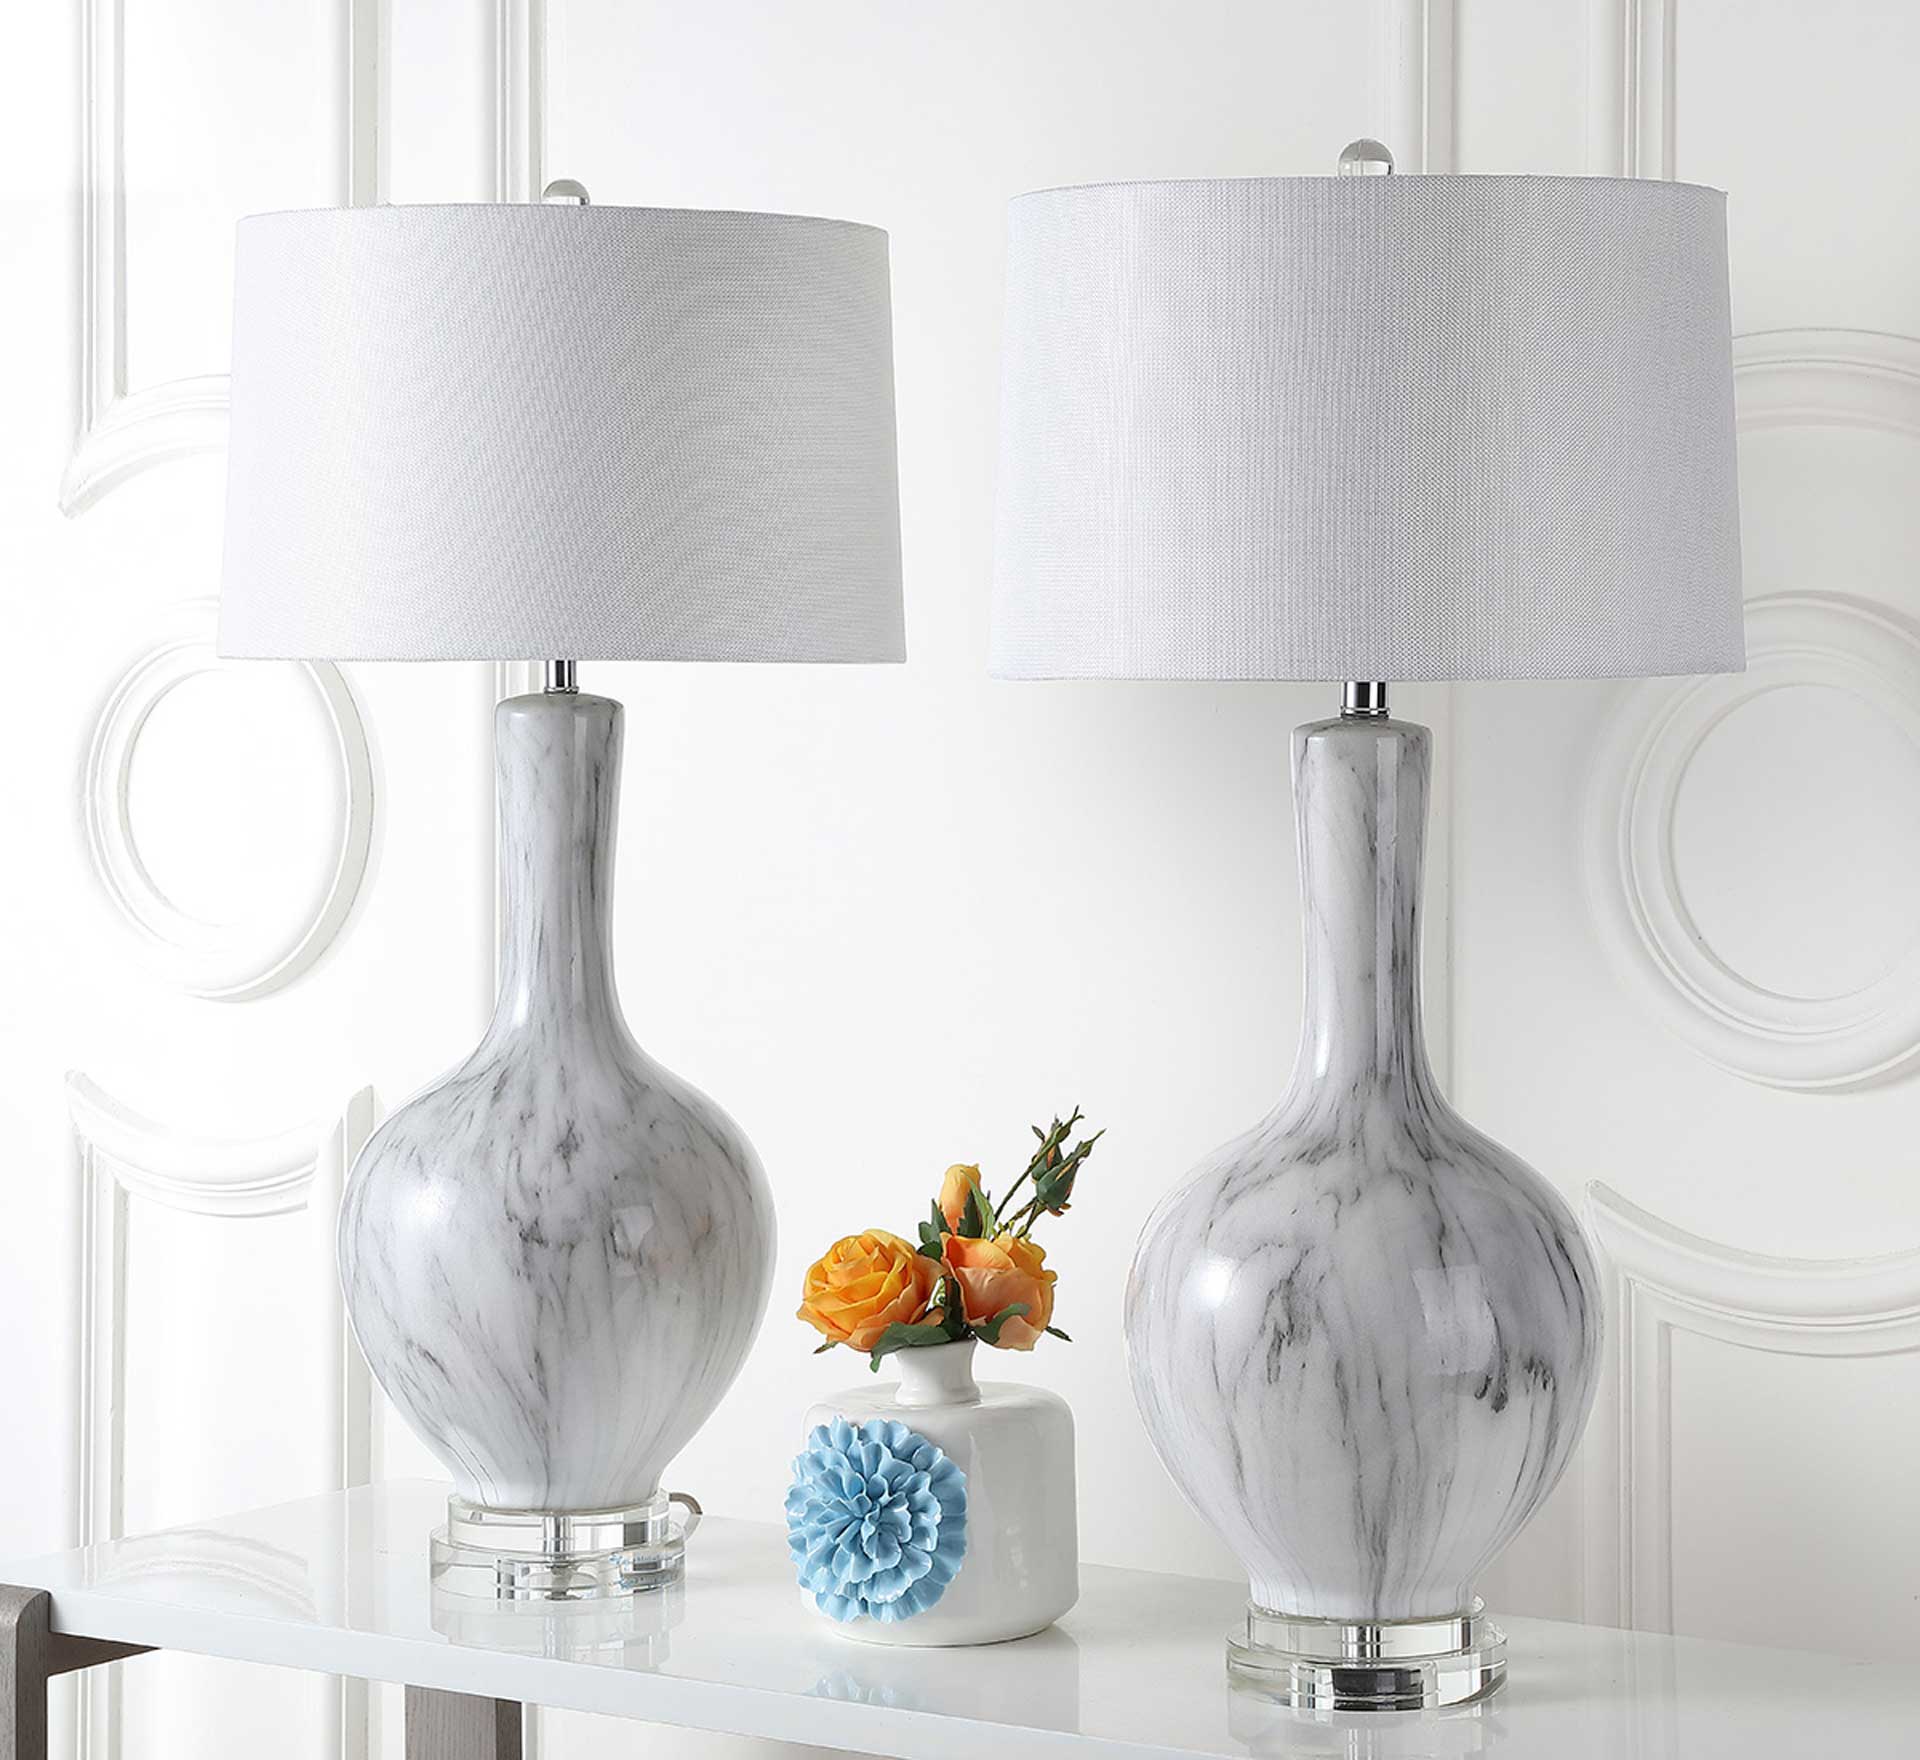 Greenlee Table Lamp White/Gray (Set of 2)